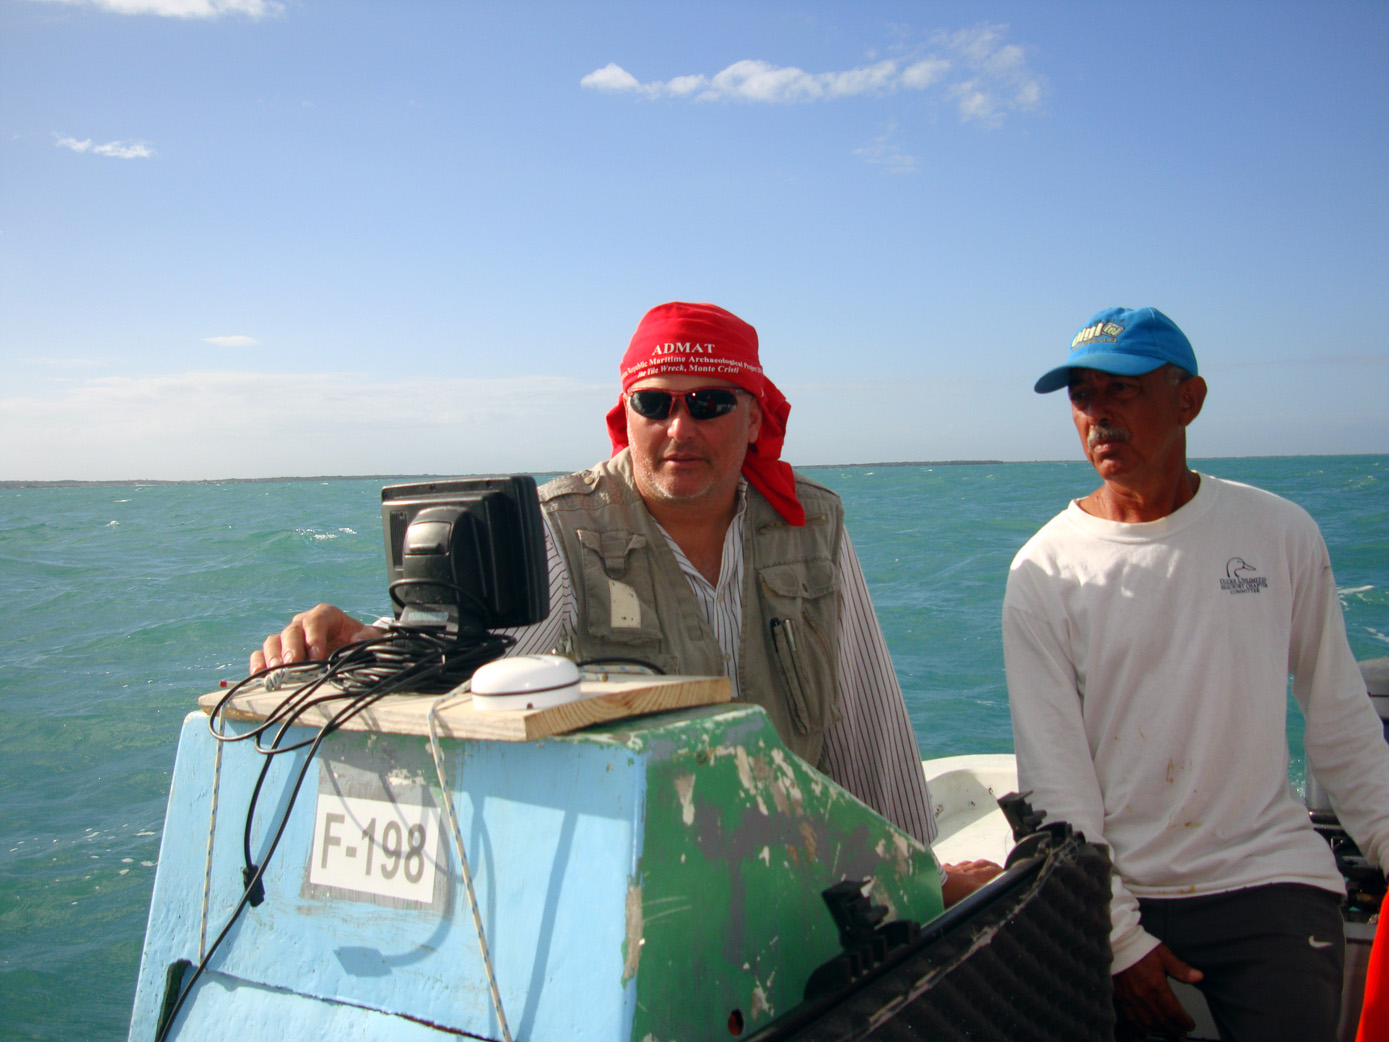  Project Leader Raimund Krob with Captain Tony Castillano from Medio Ambiente during the survey for   Wreck One   in Monte Cristi Bay in 2016    